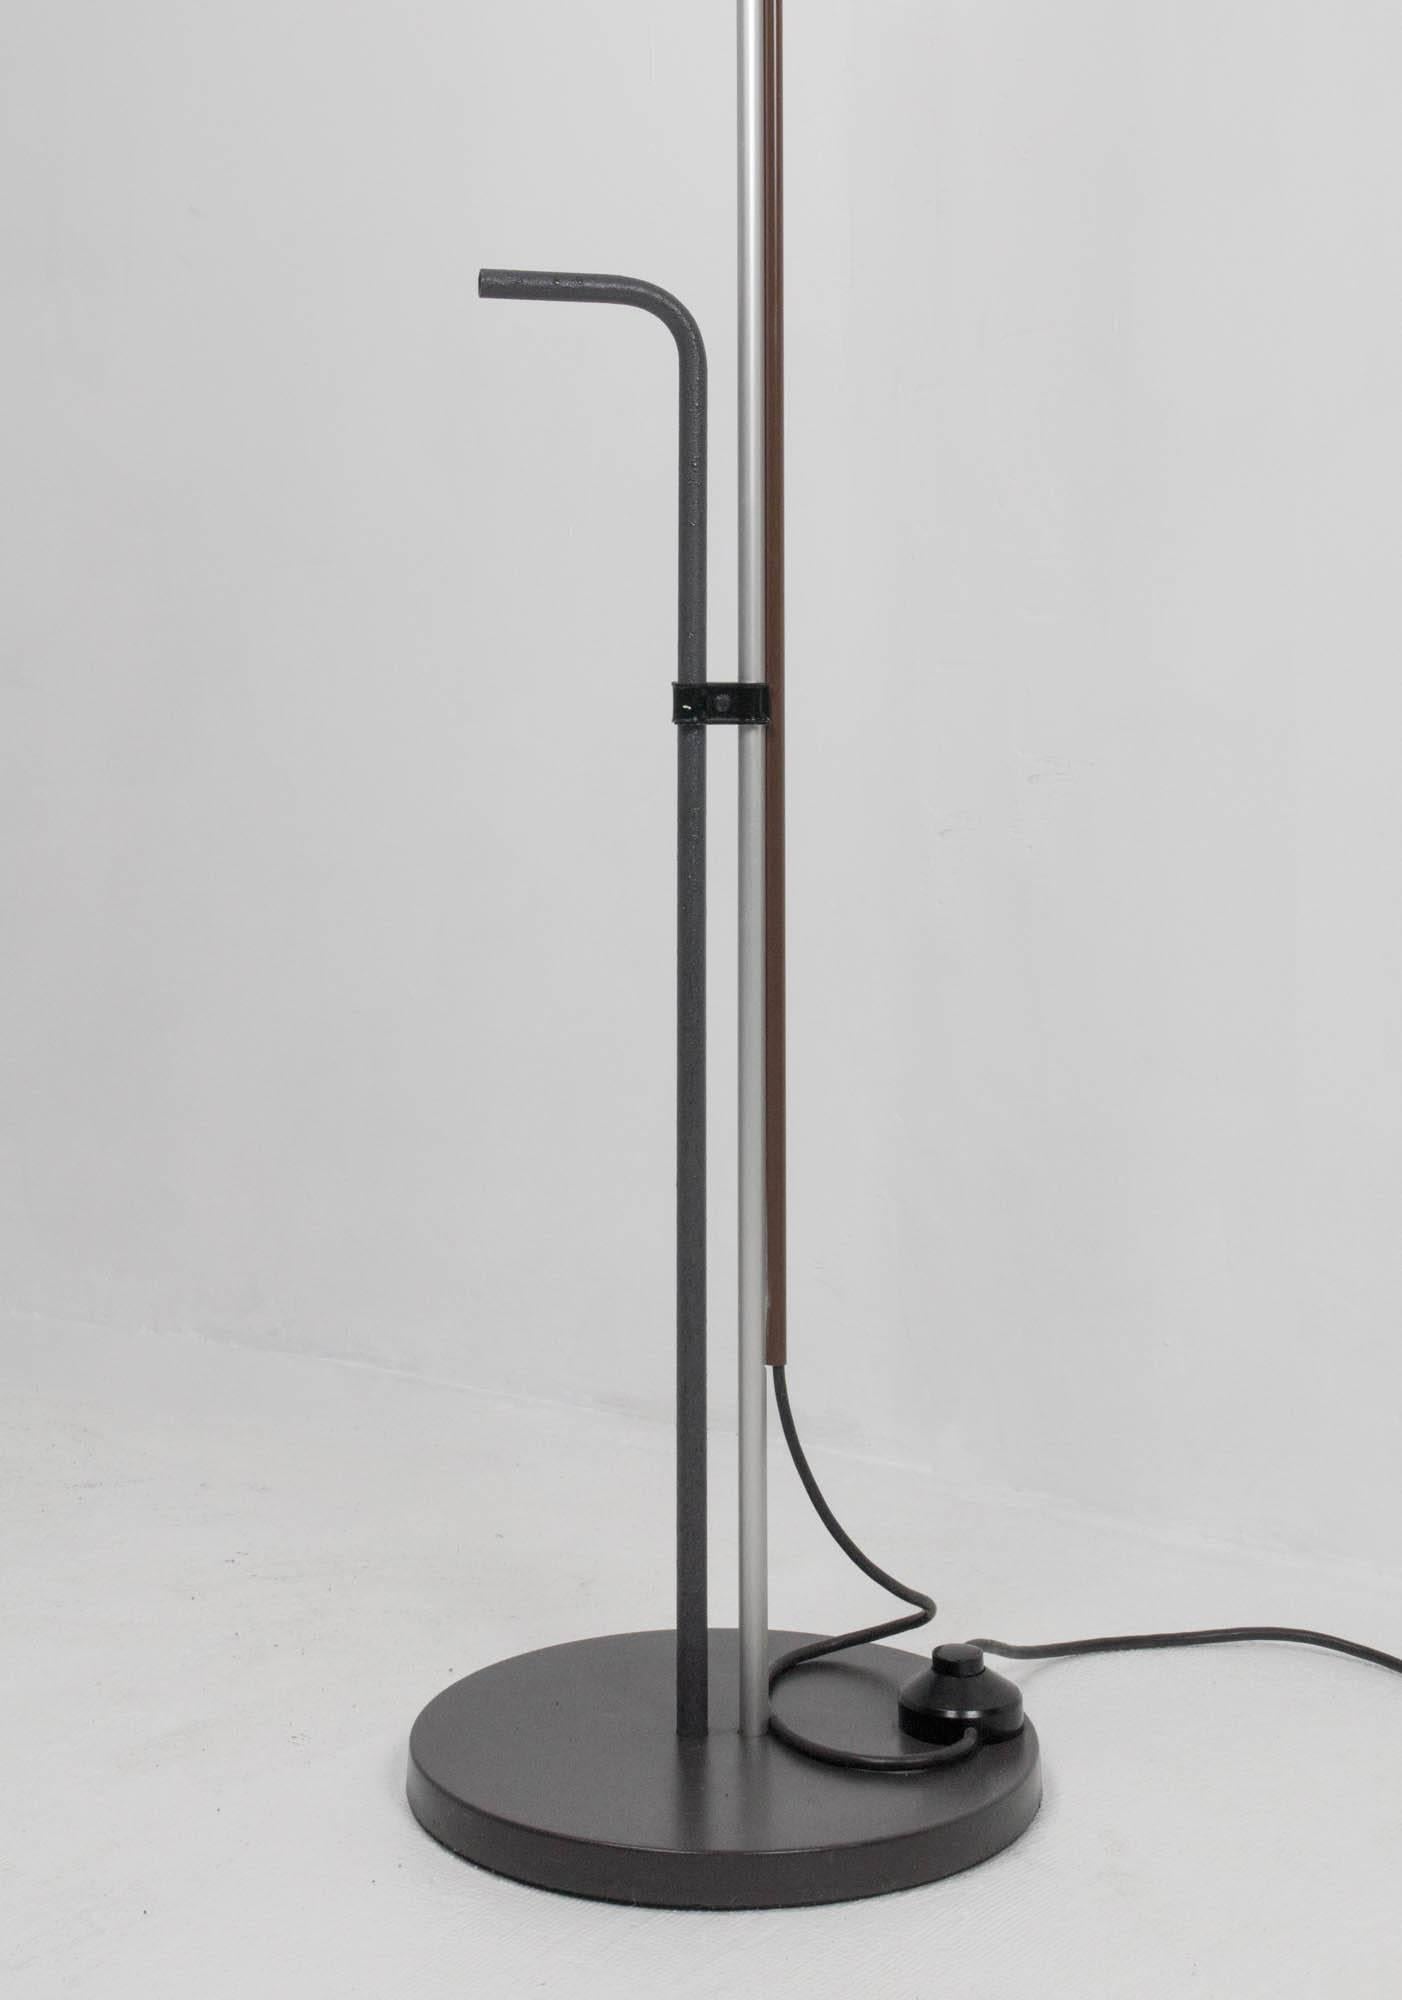 Aggregato floor lamp by Enzo Mari and Giancarlo Fassina for Artemide in anodized aluminium and enameled steel with bent rod handle and foot switch.